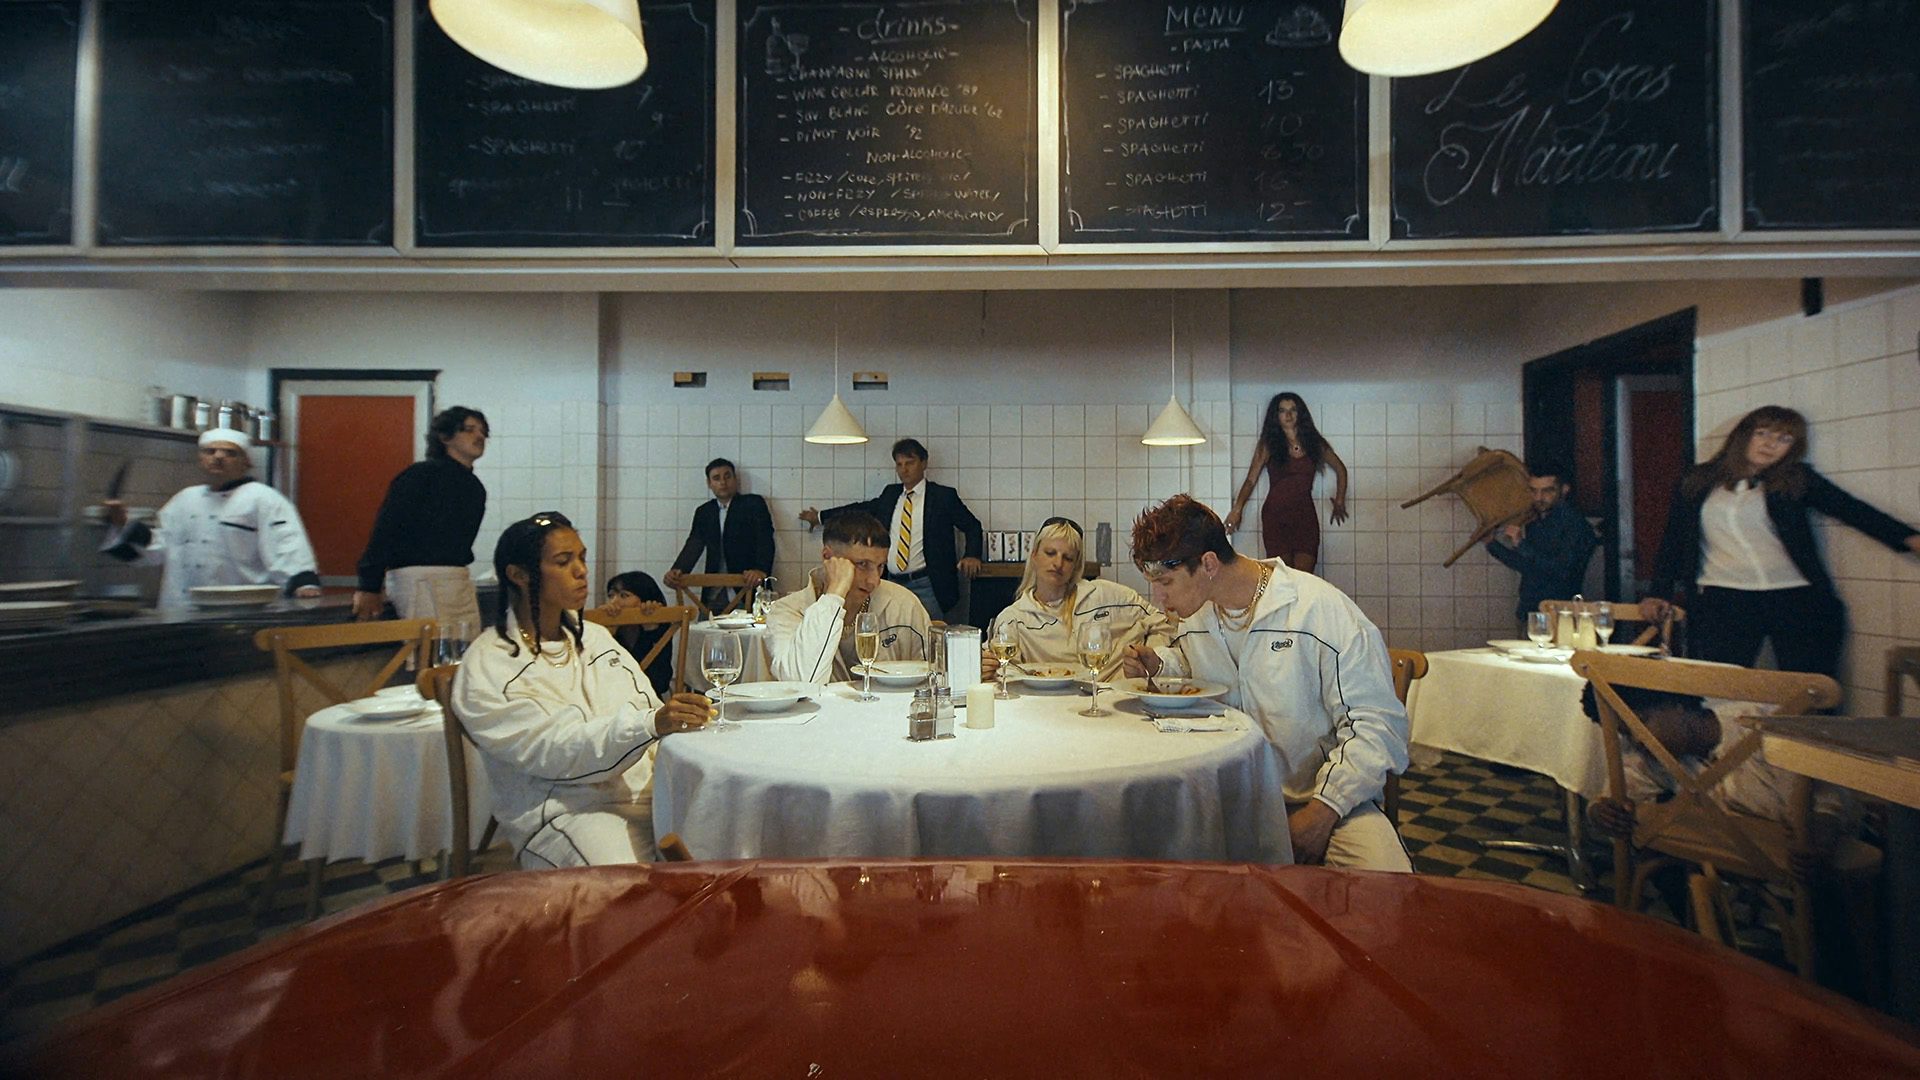 Still from Oscar Hudson's music video for Big Hammer by James Blake showing four young people wearing matching white tracksuits and eating food in a restaurant, which is lined with scared looking restaurant staff and guests